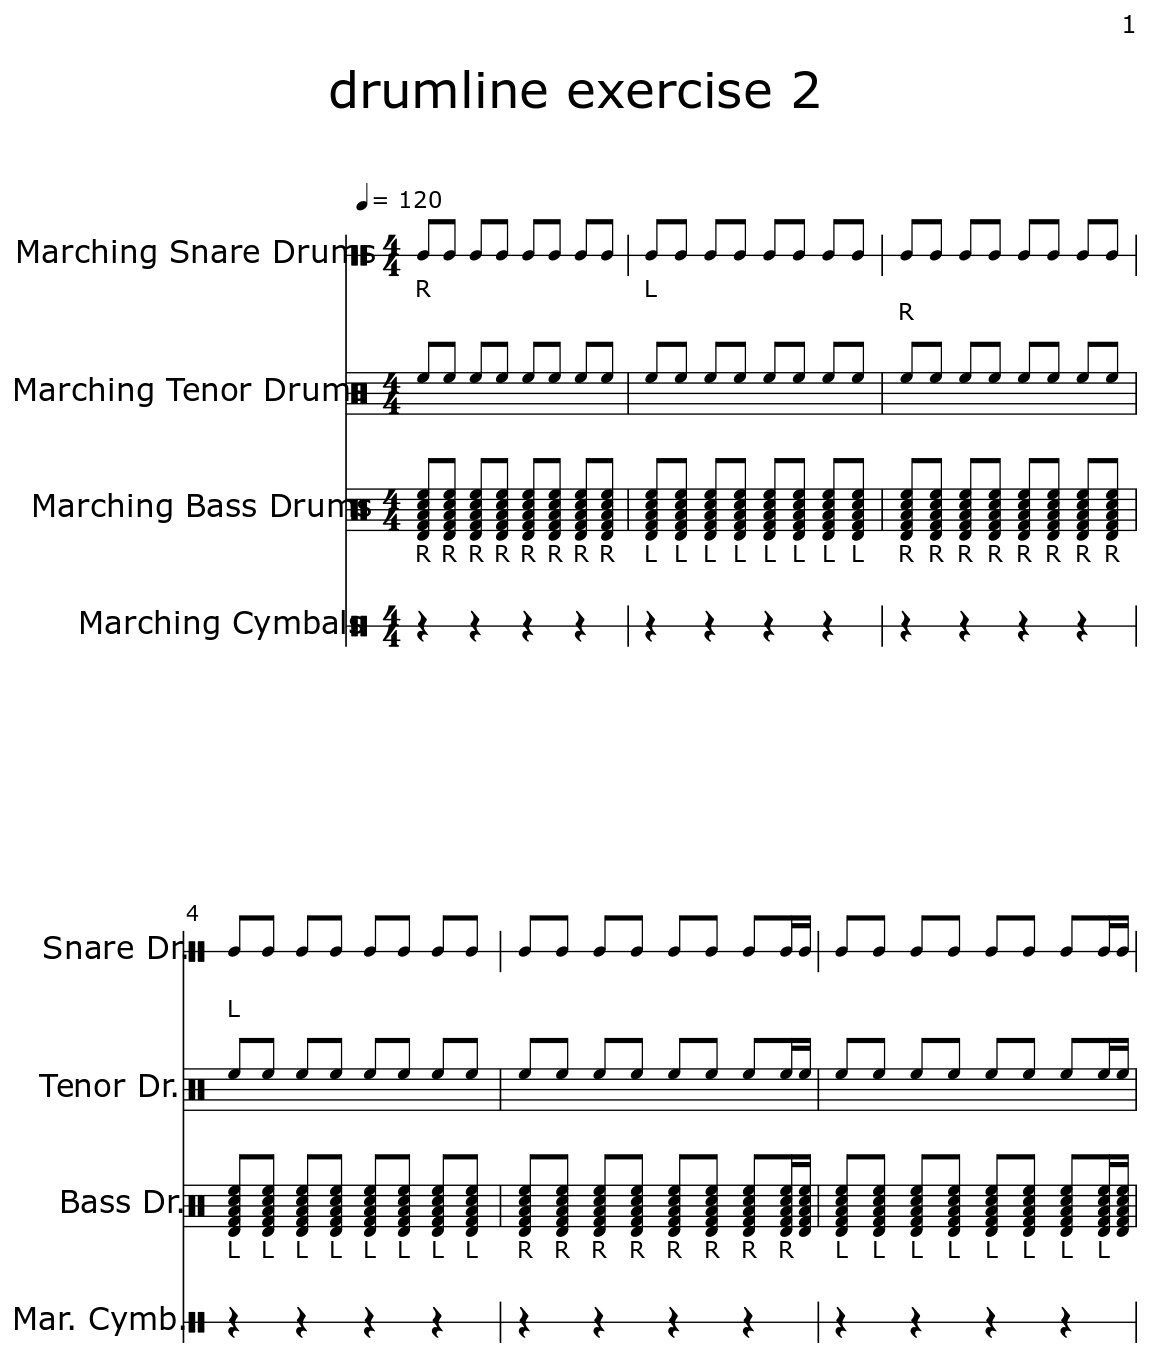 drumline exercise 2 - Sheet music for Marching Bass Drums